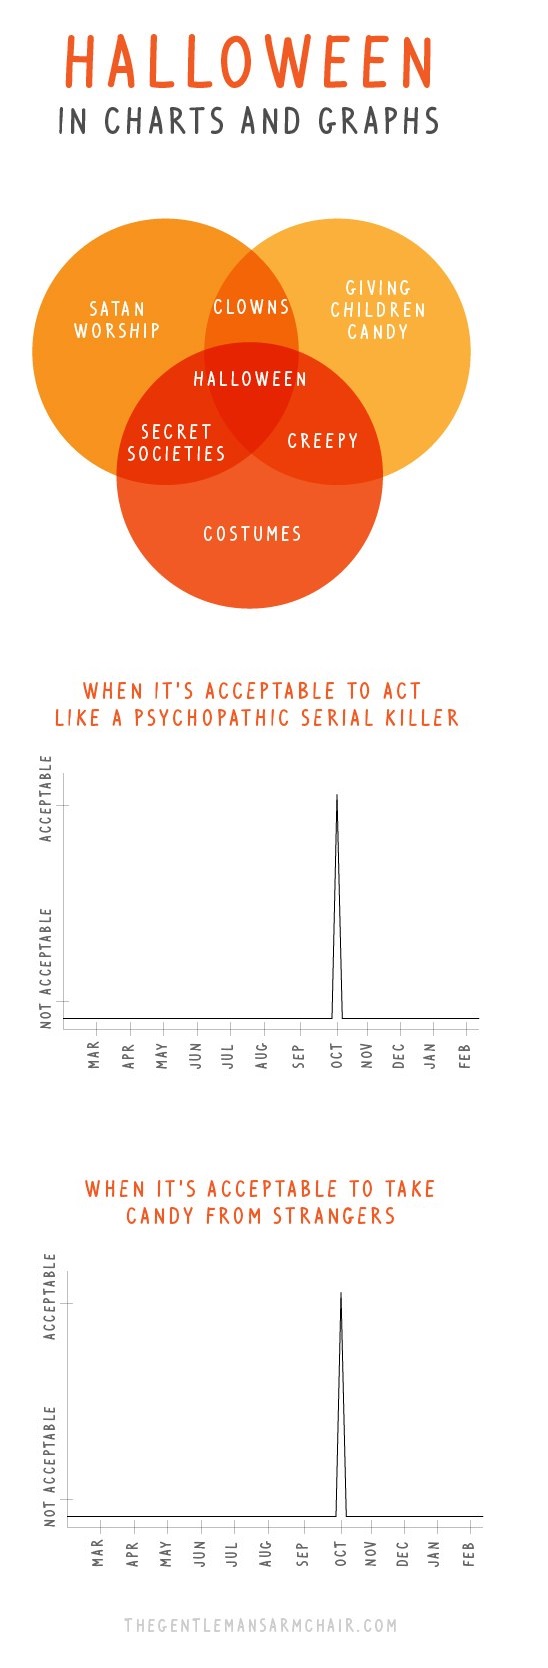 funny-picture-halloween-in-charts-and-graphs